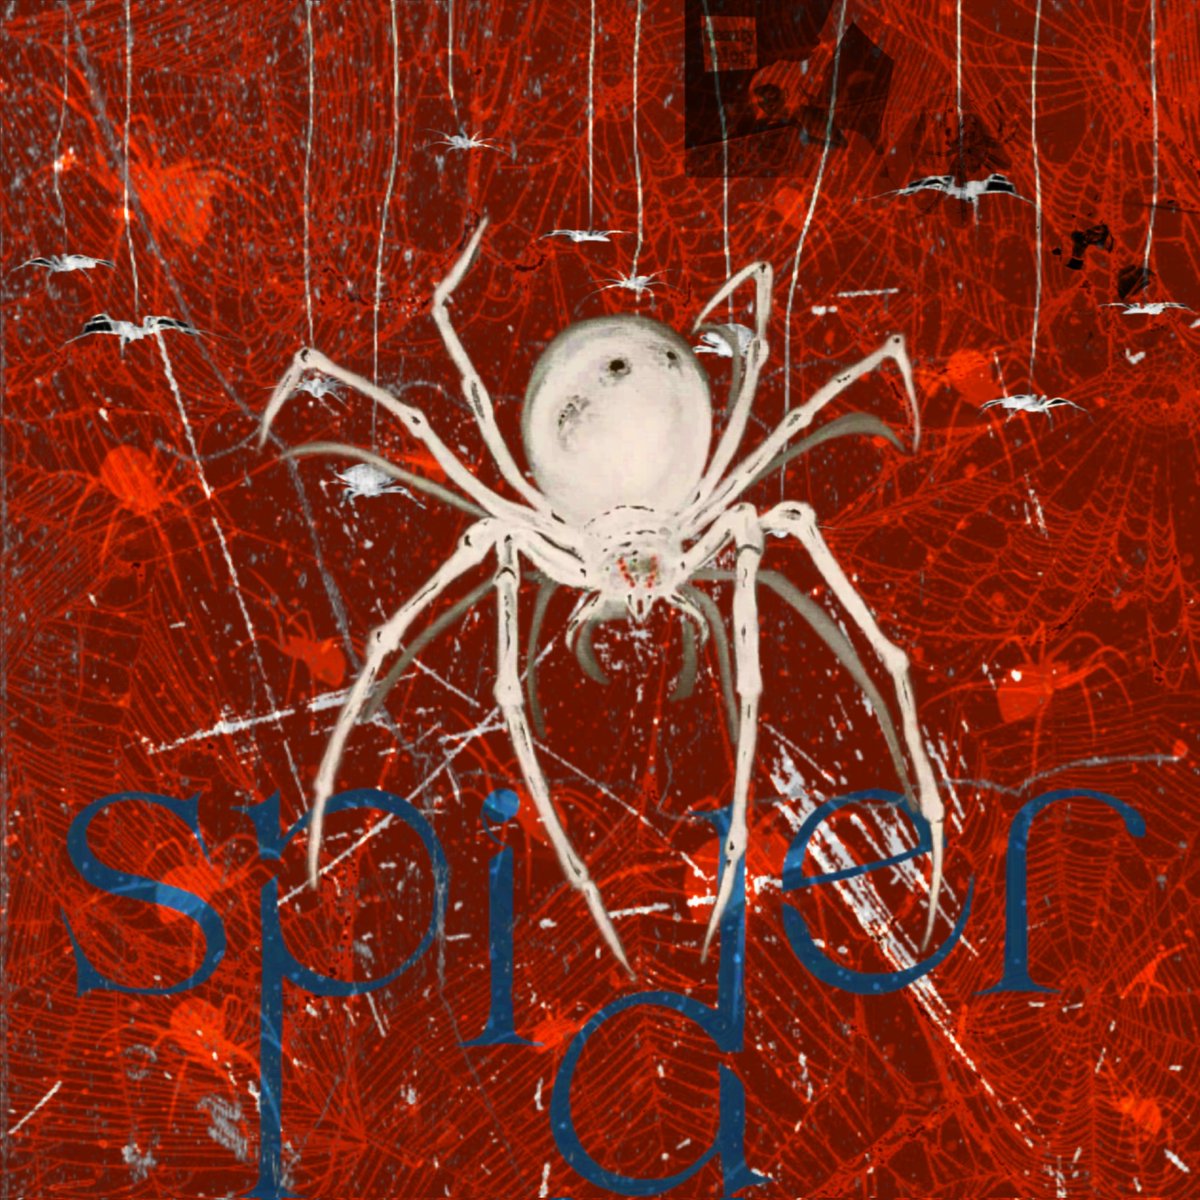 New Tape 'Spider' 
Still haven't figured out a release date.
Lmk if you wanna single first!
#discoverypage
#trending 
#trendingmusic 
#trendingpage 
#newmusic 
#Musician 
#foryou
#hiphop 
#rap 
#rapper 
#single 
#typebeat 
#tybebeats 
#hiphopmusic 
#hiphopbeats 
#musicproducer